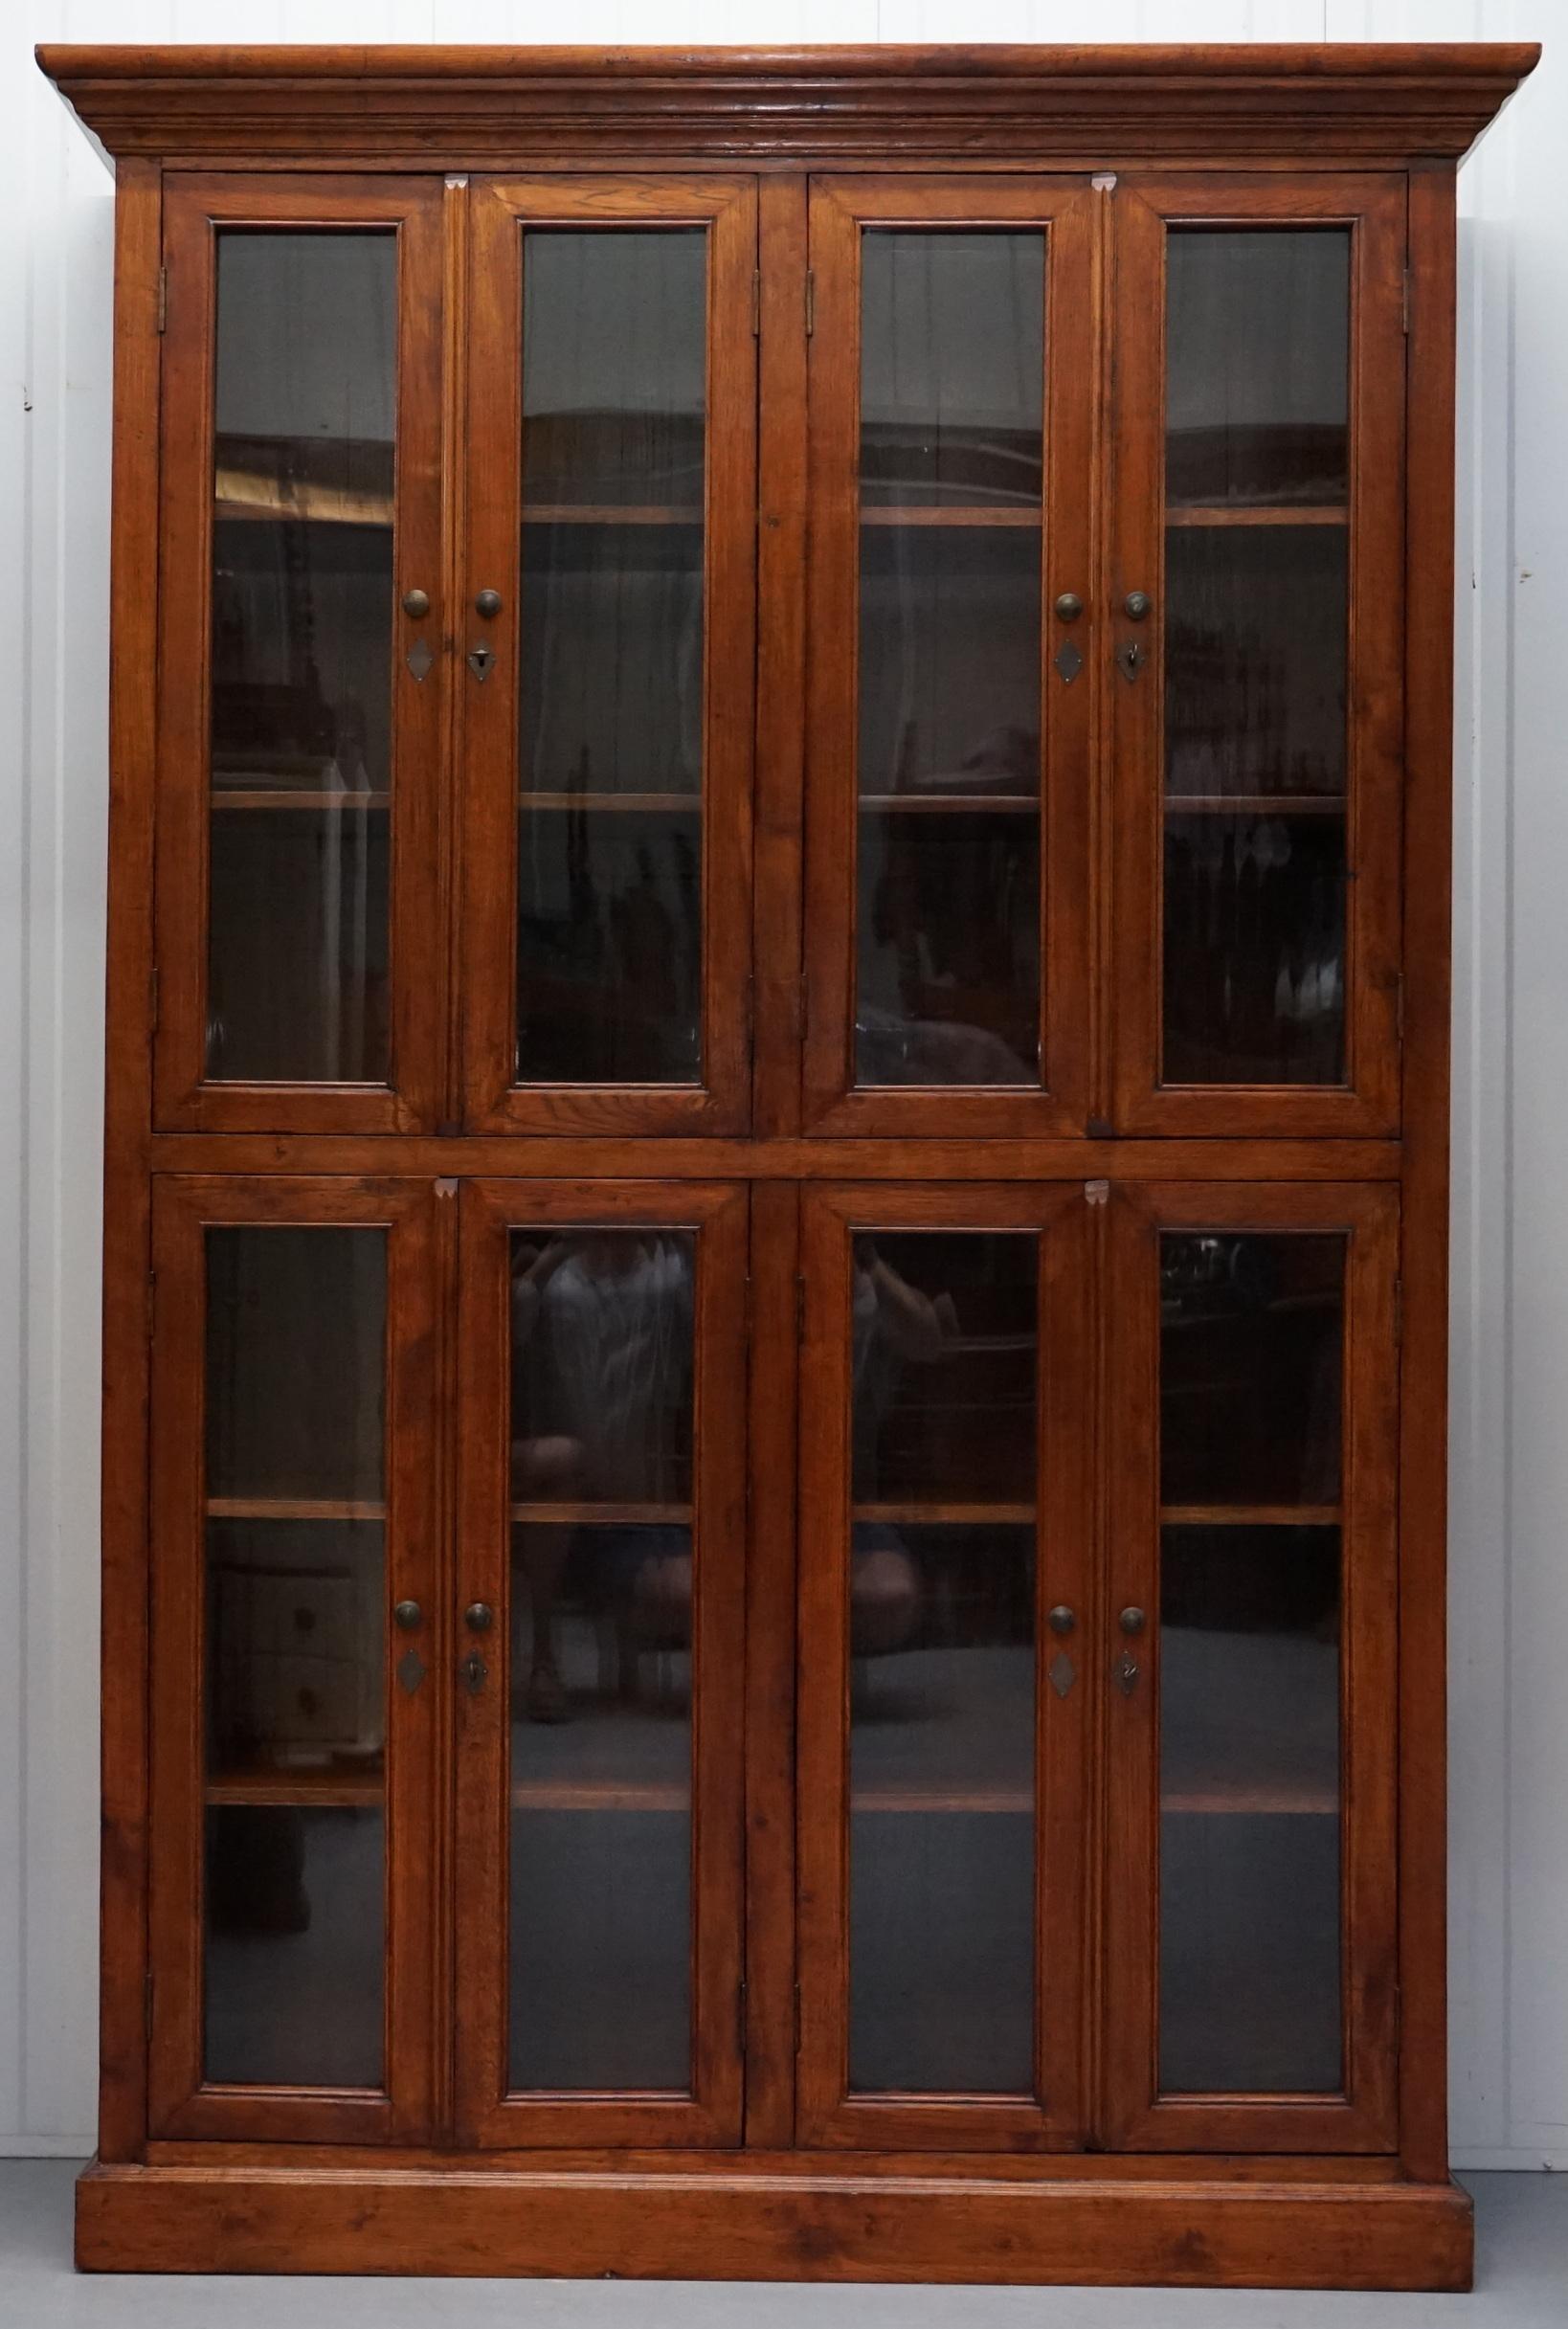 We are delighted to offer for sale this stunning very large panelled mahogany library bookcase cabinet with four lockable cupboard doors

A very good looking and grand functional piece of furniture, the timber is solid light English Mahogany, it